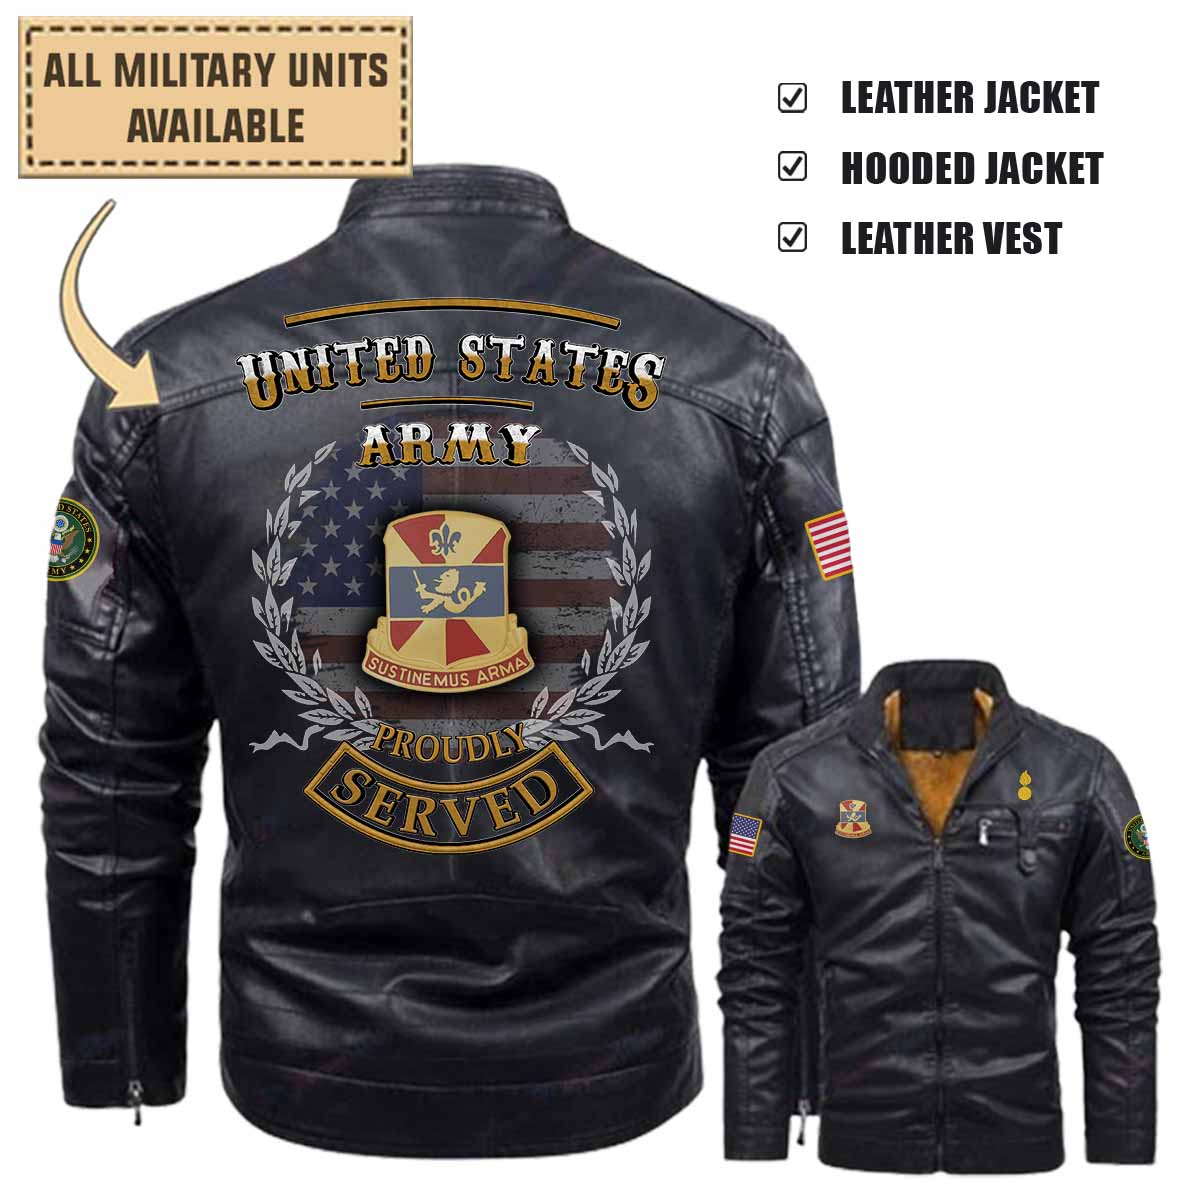 738th maint bn 738th maintenance battalionleather jacket and vest bkf0y